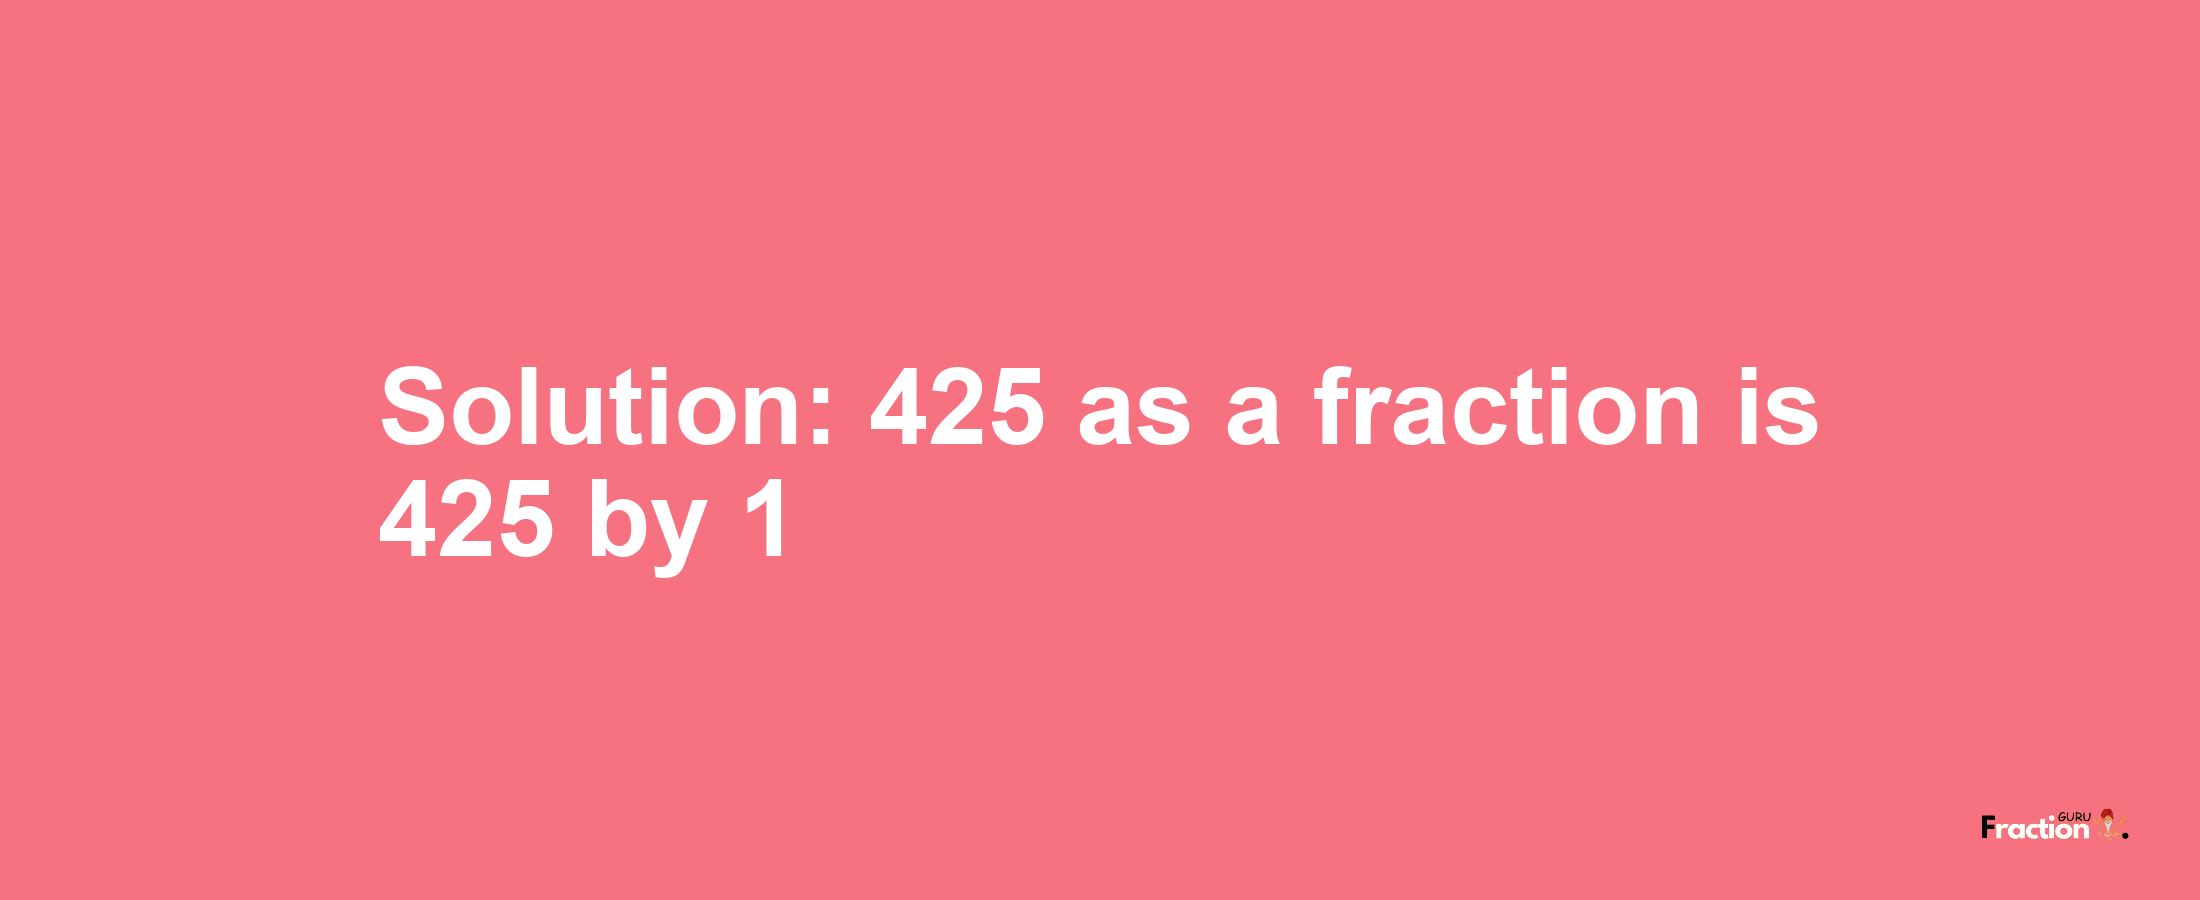 Solution:425 as a fraction is 425/1